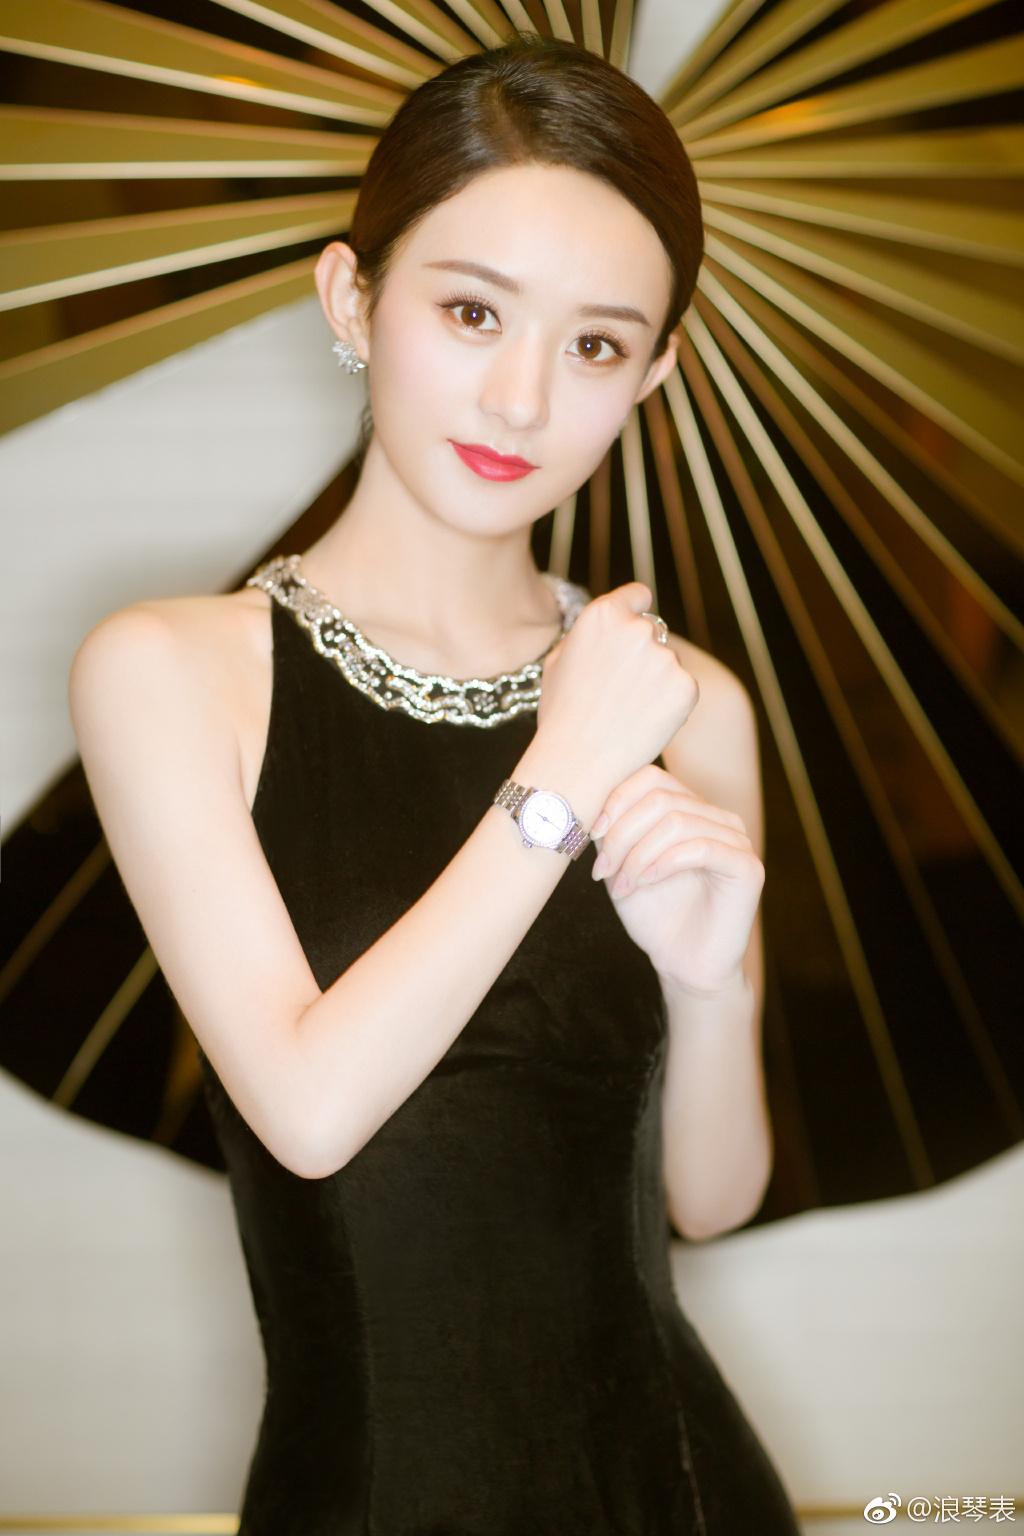 Zhao Li Ying joins luxury watch brand Longines as one of its